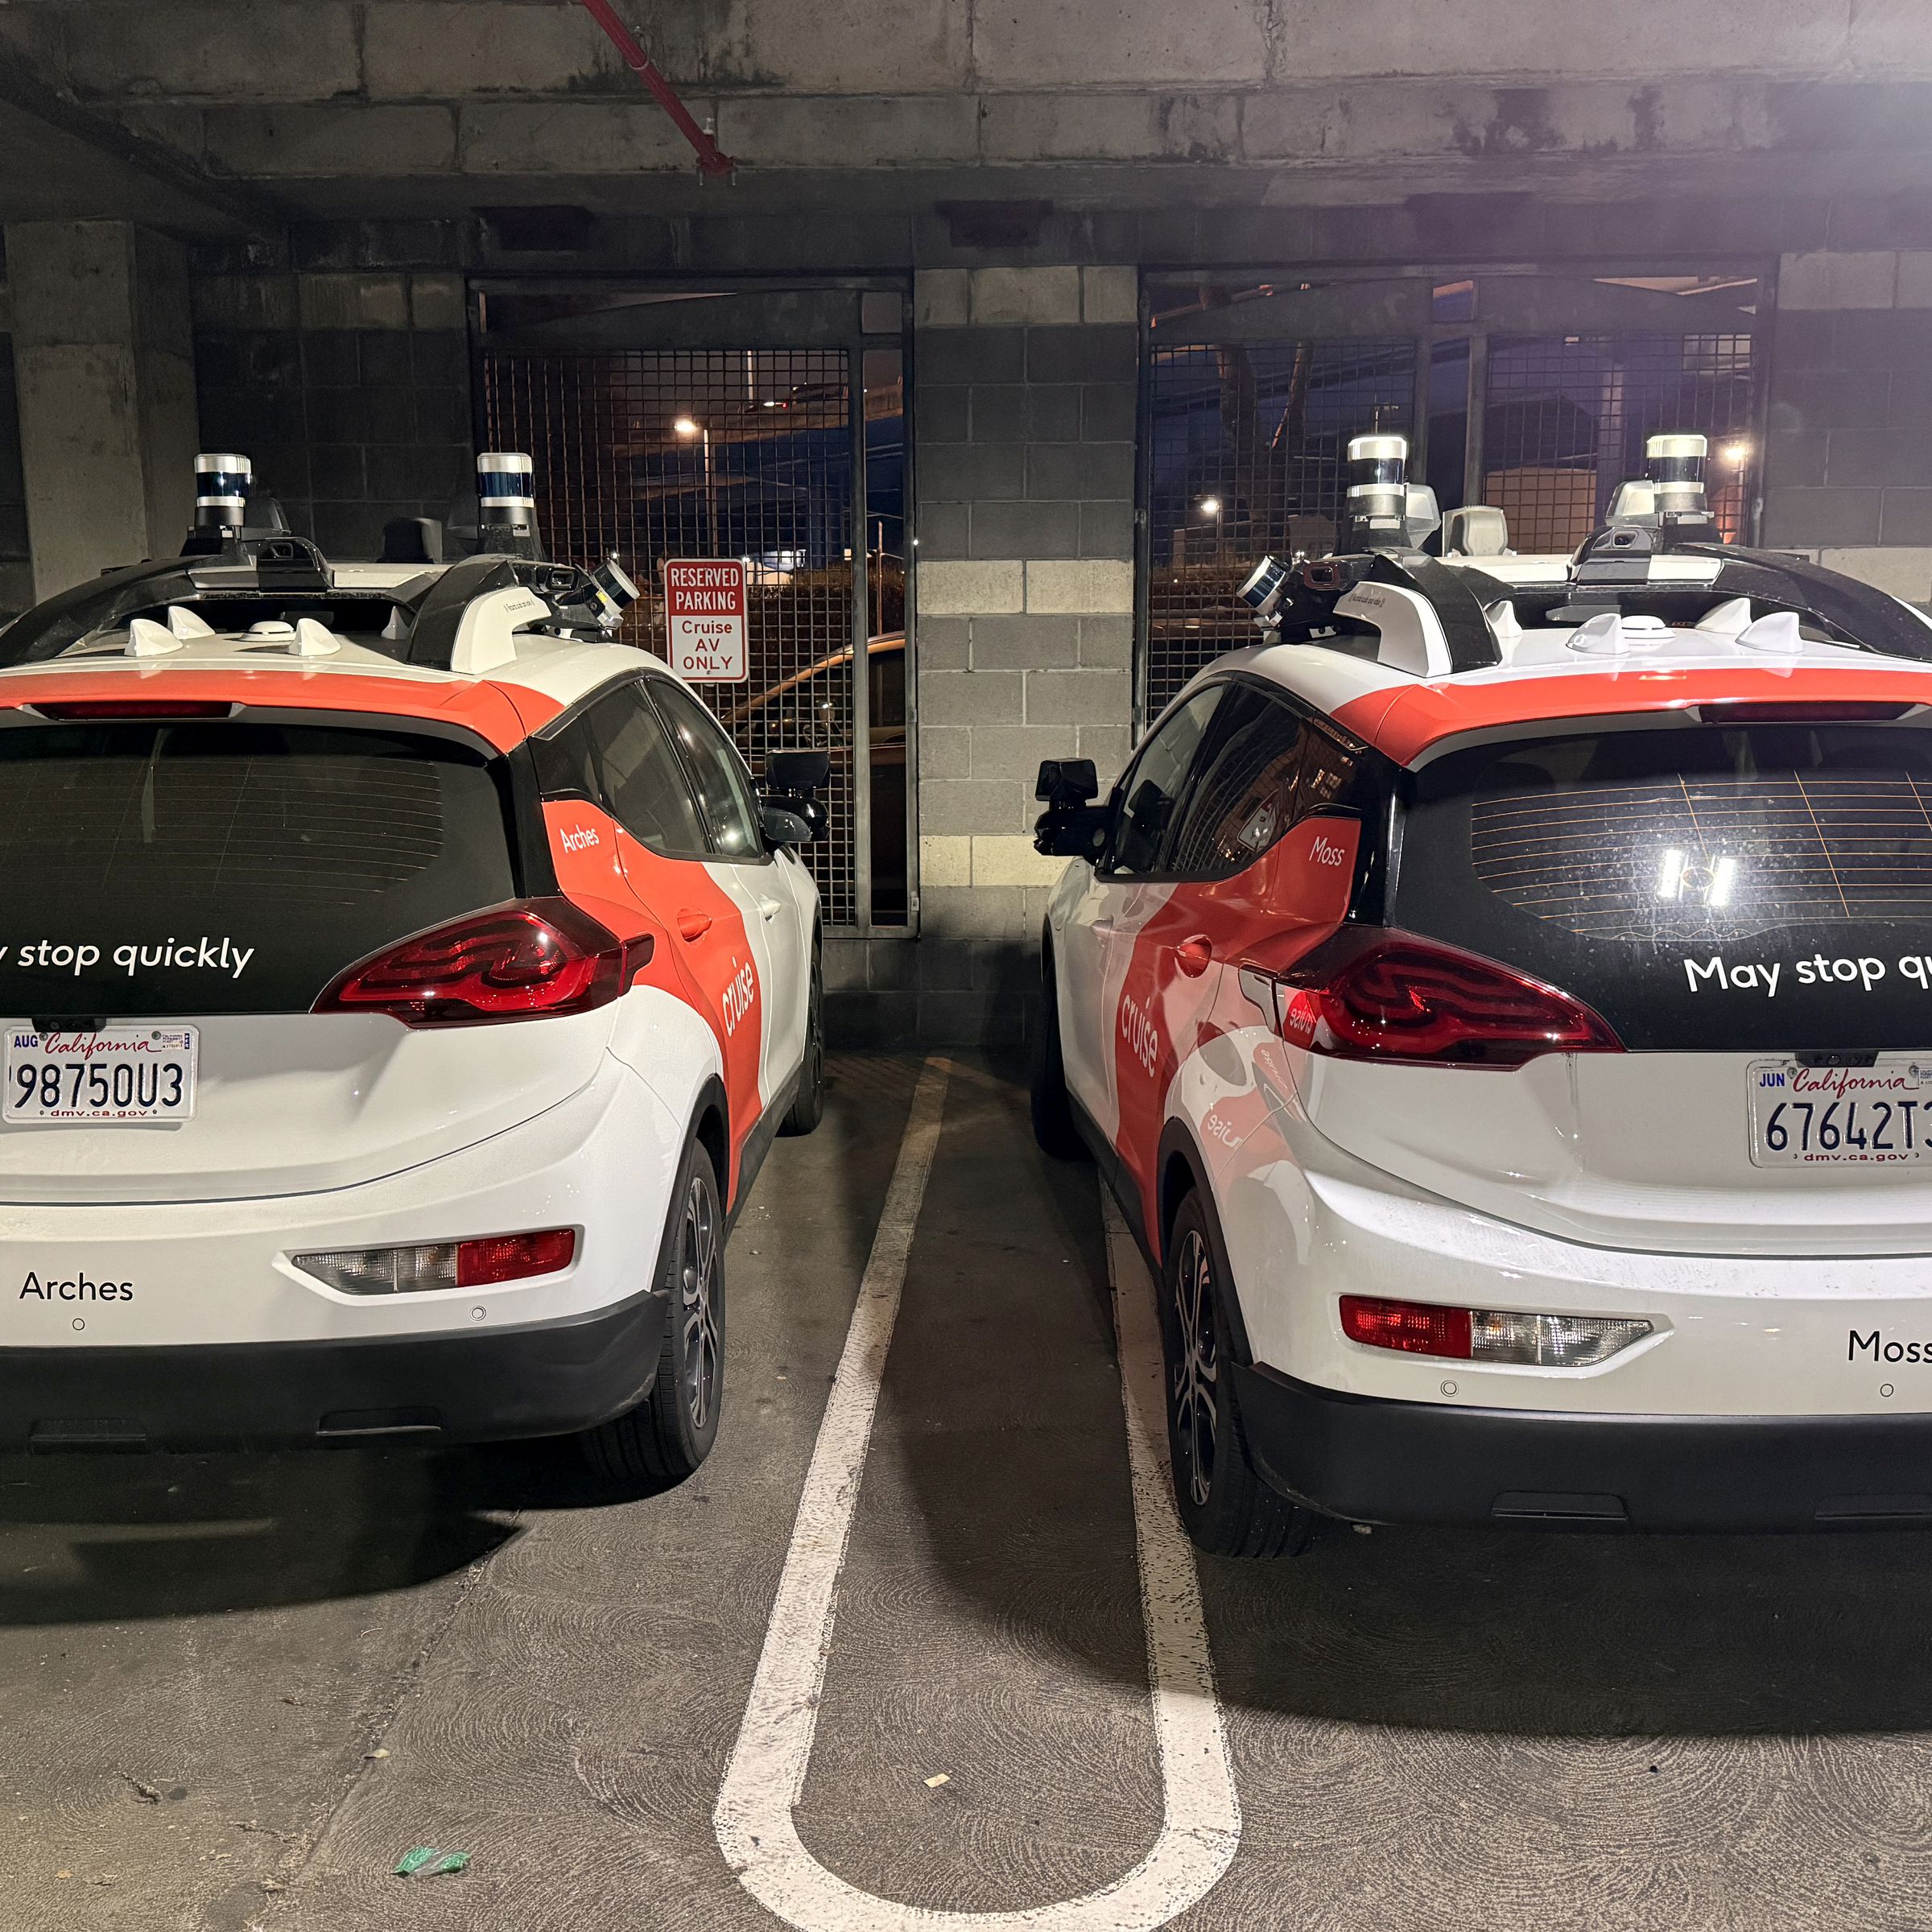 Cruise driverless vehicles in a parking garage.